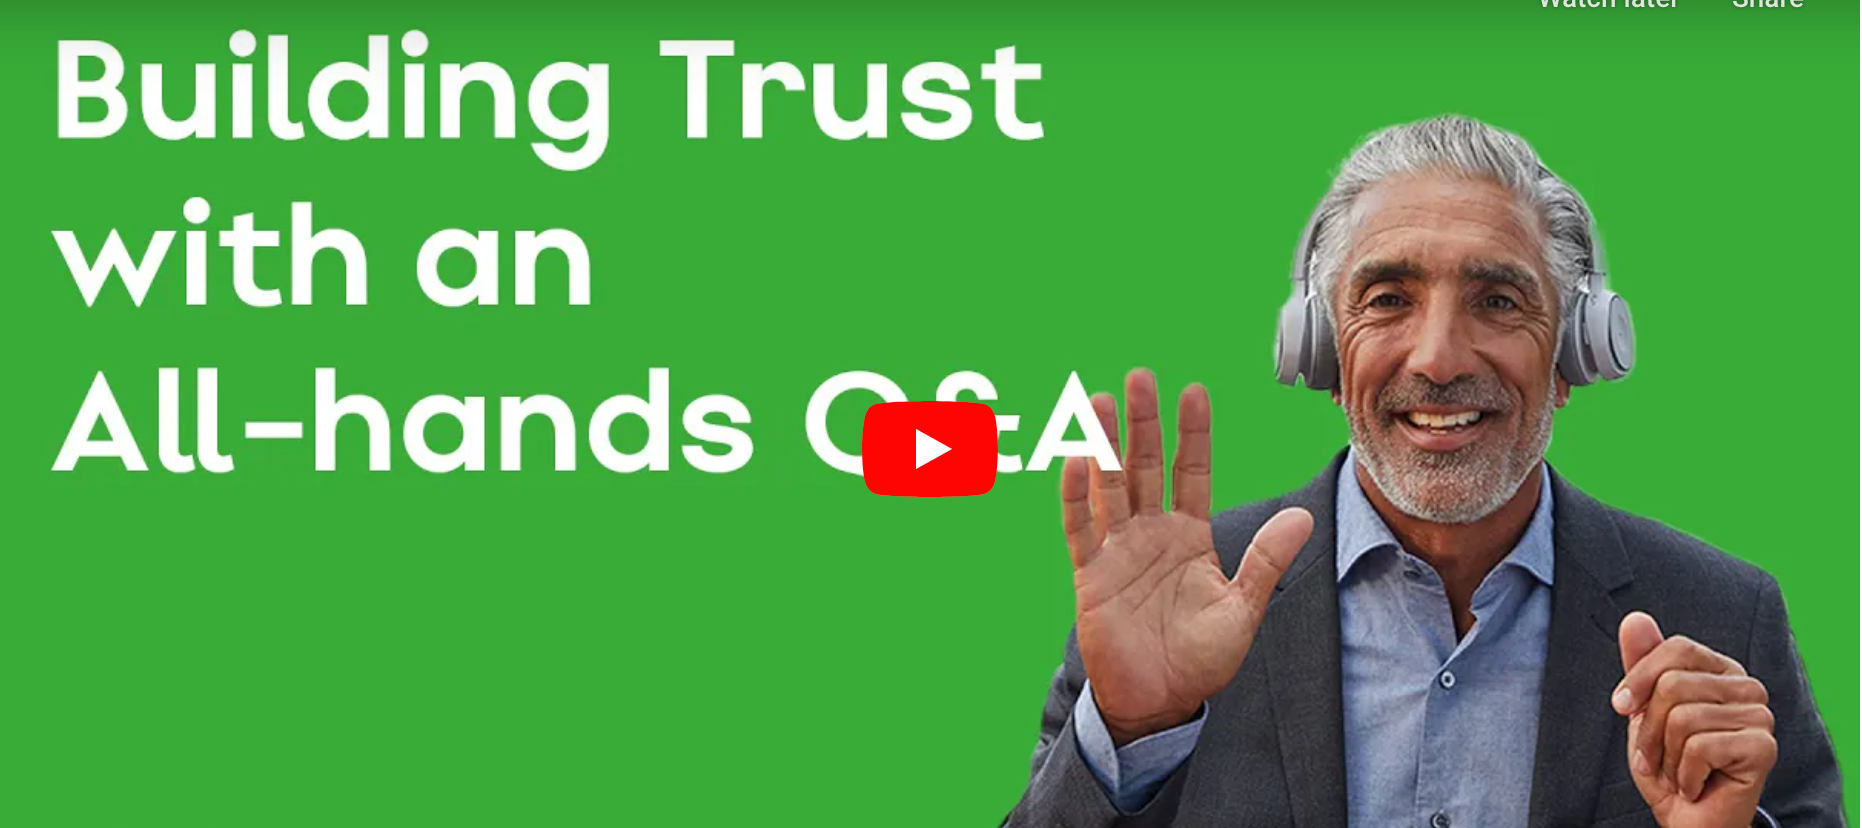 Video: Building trust with an all-hands Q&A